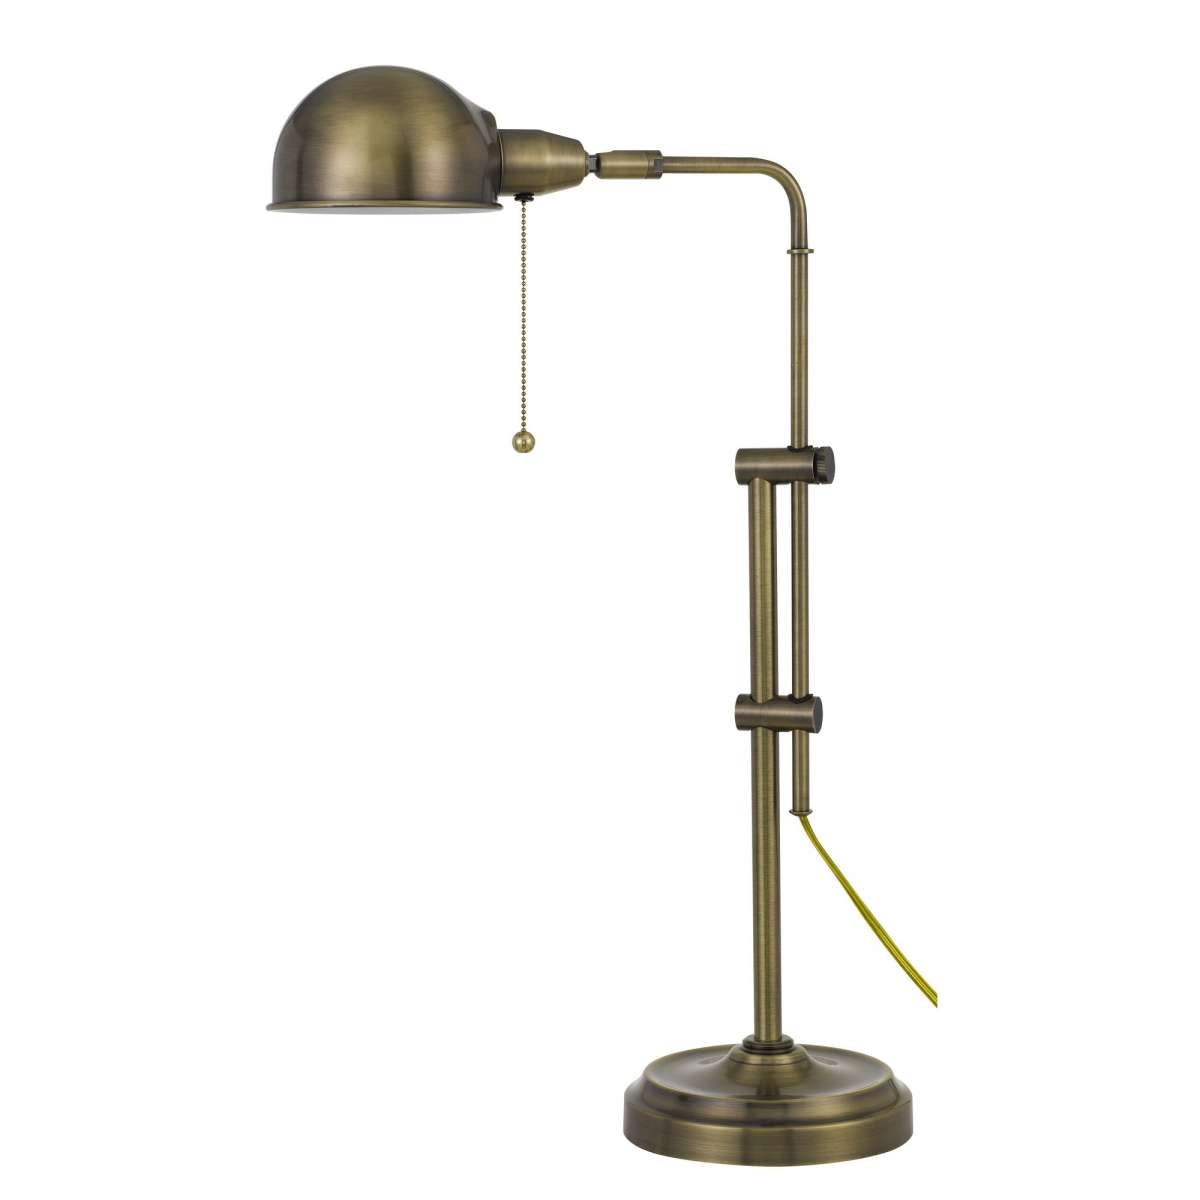 Adjustable Height Metal Desk Lamp With Dome Shade, Brass By Benzara